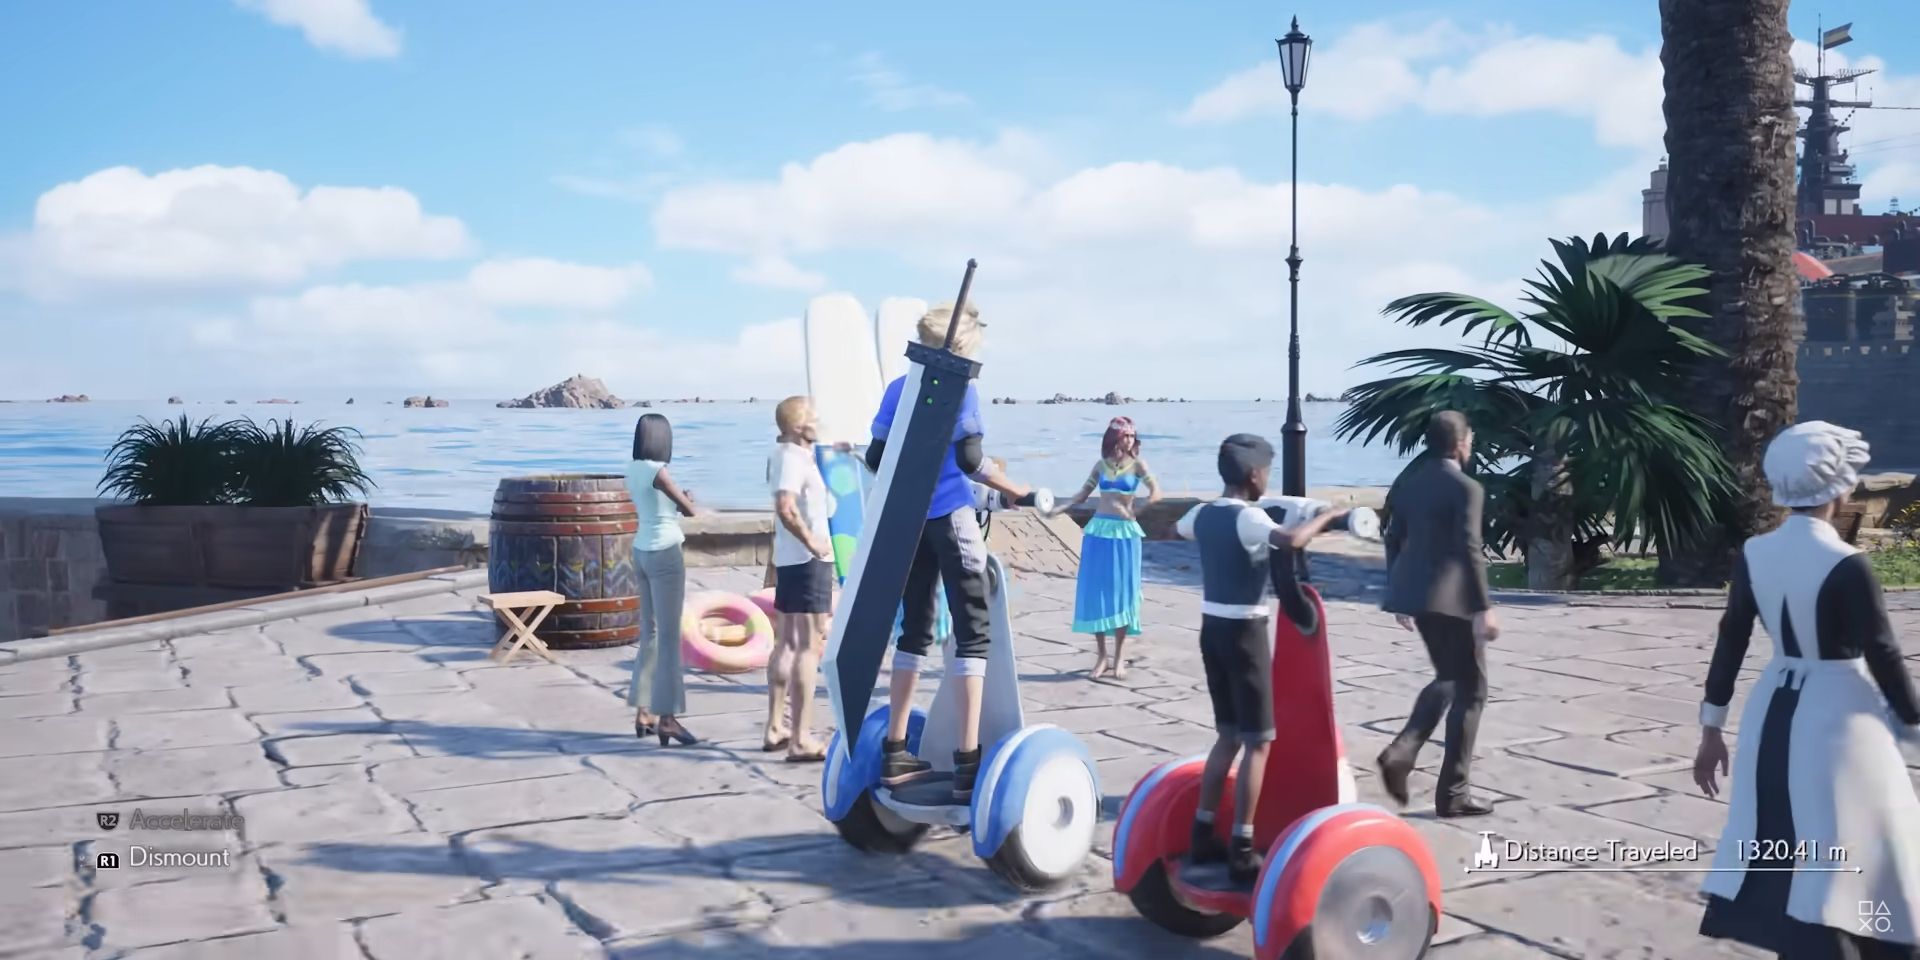 Cloud rides a Segway along a beachfront boardwalk in what's likely Costa del Sol's apperance in FF7 Rebirth.